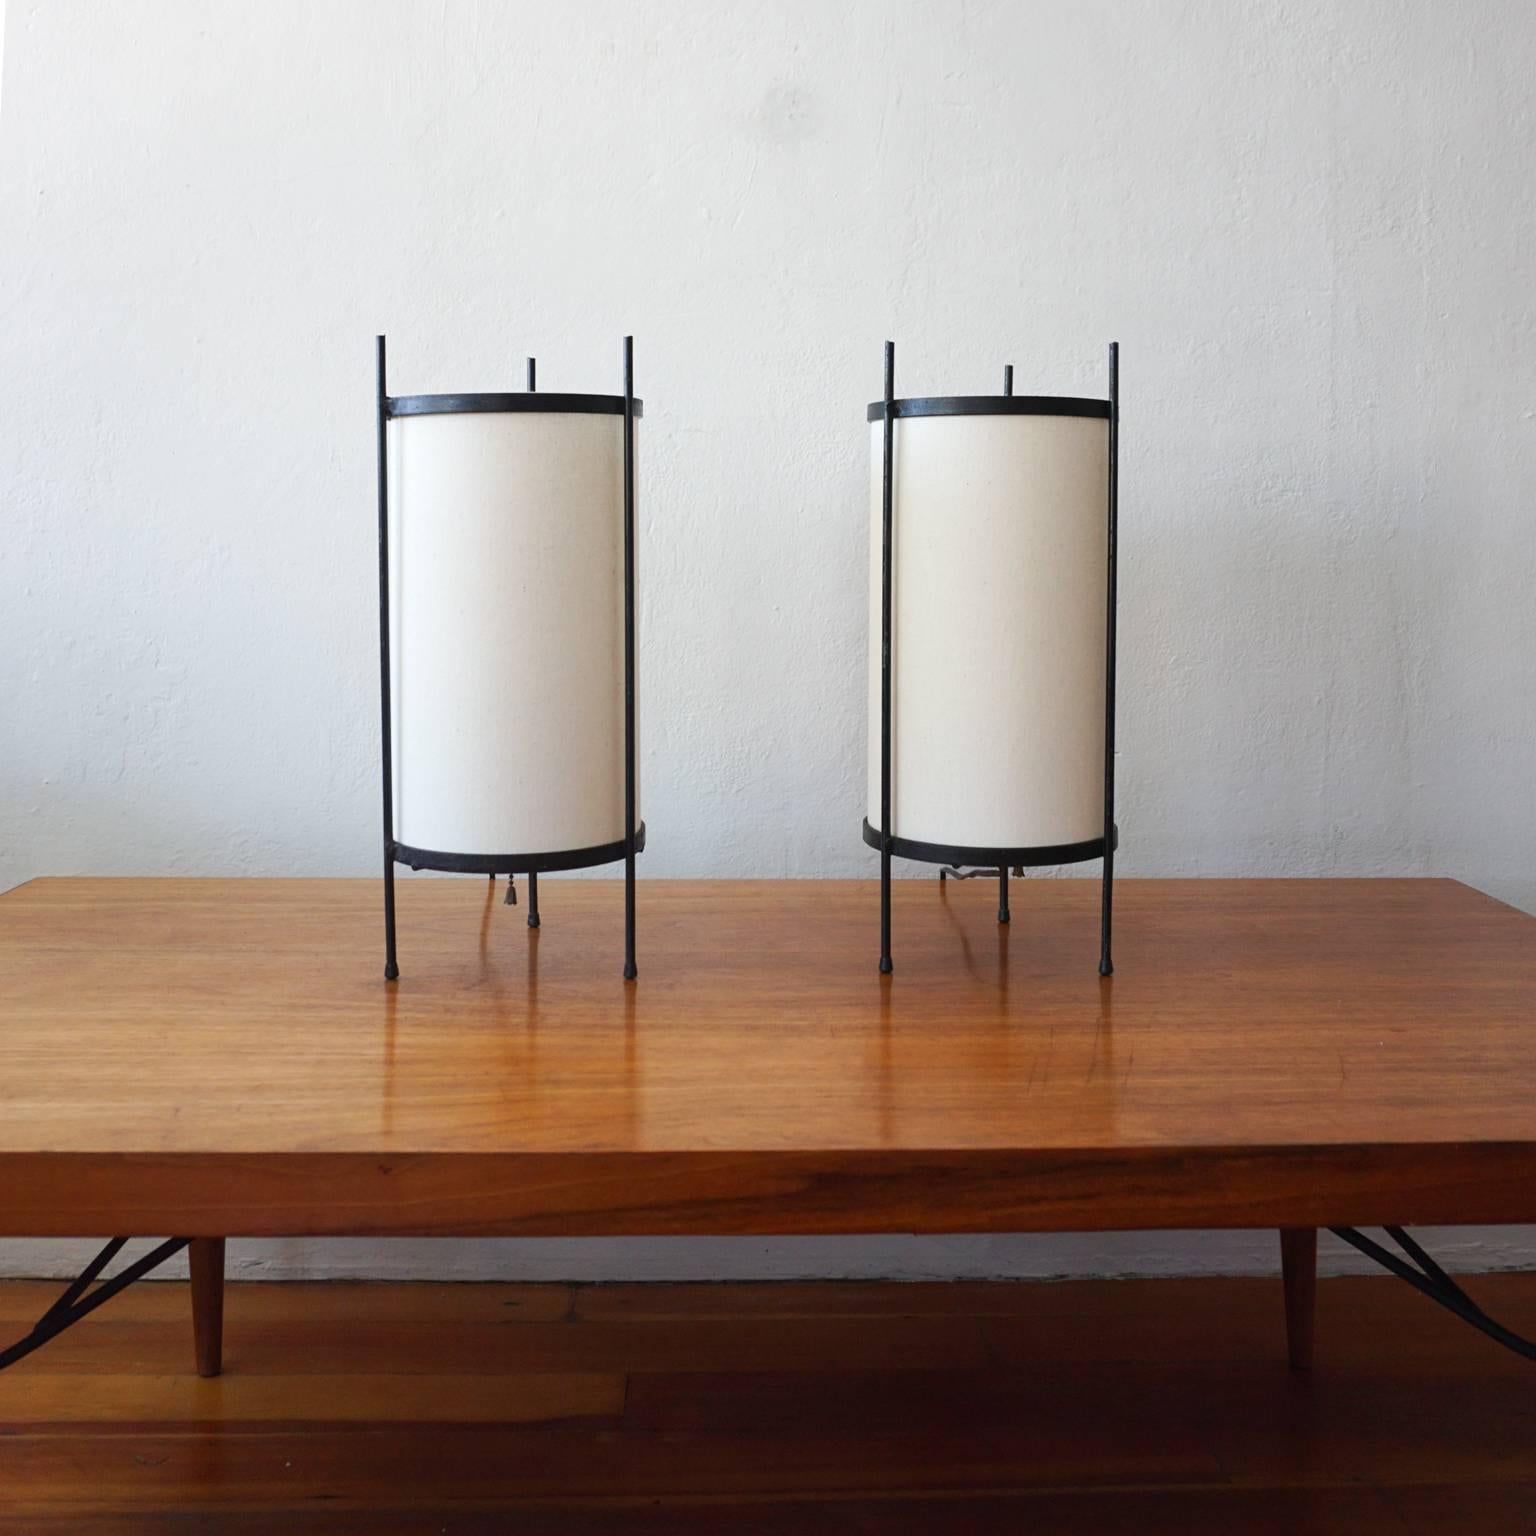 Pair of iron cylinder lamps with new natural linen shades, 1950s.